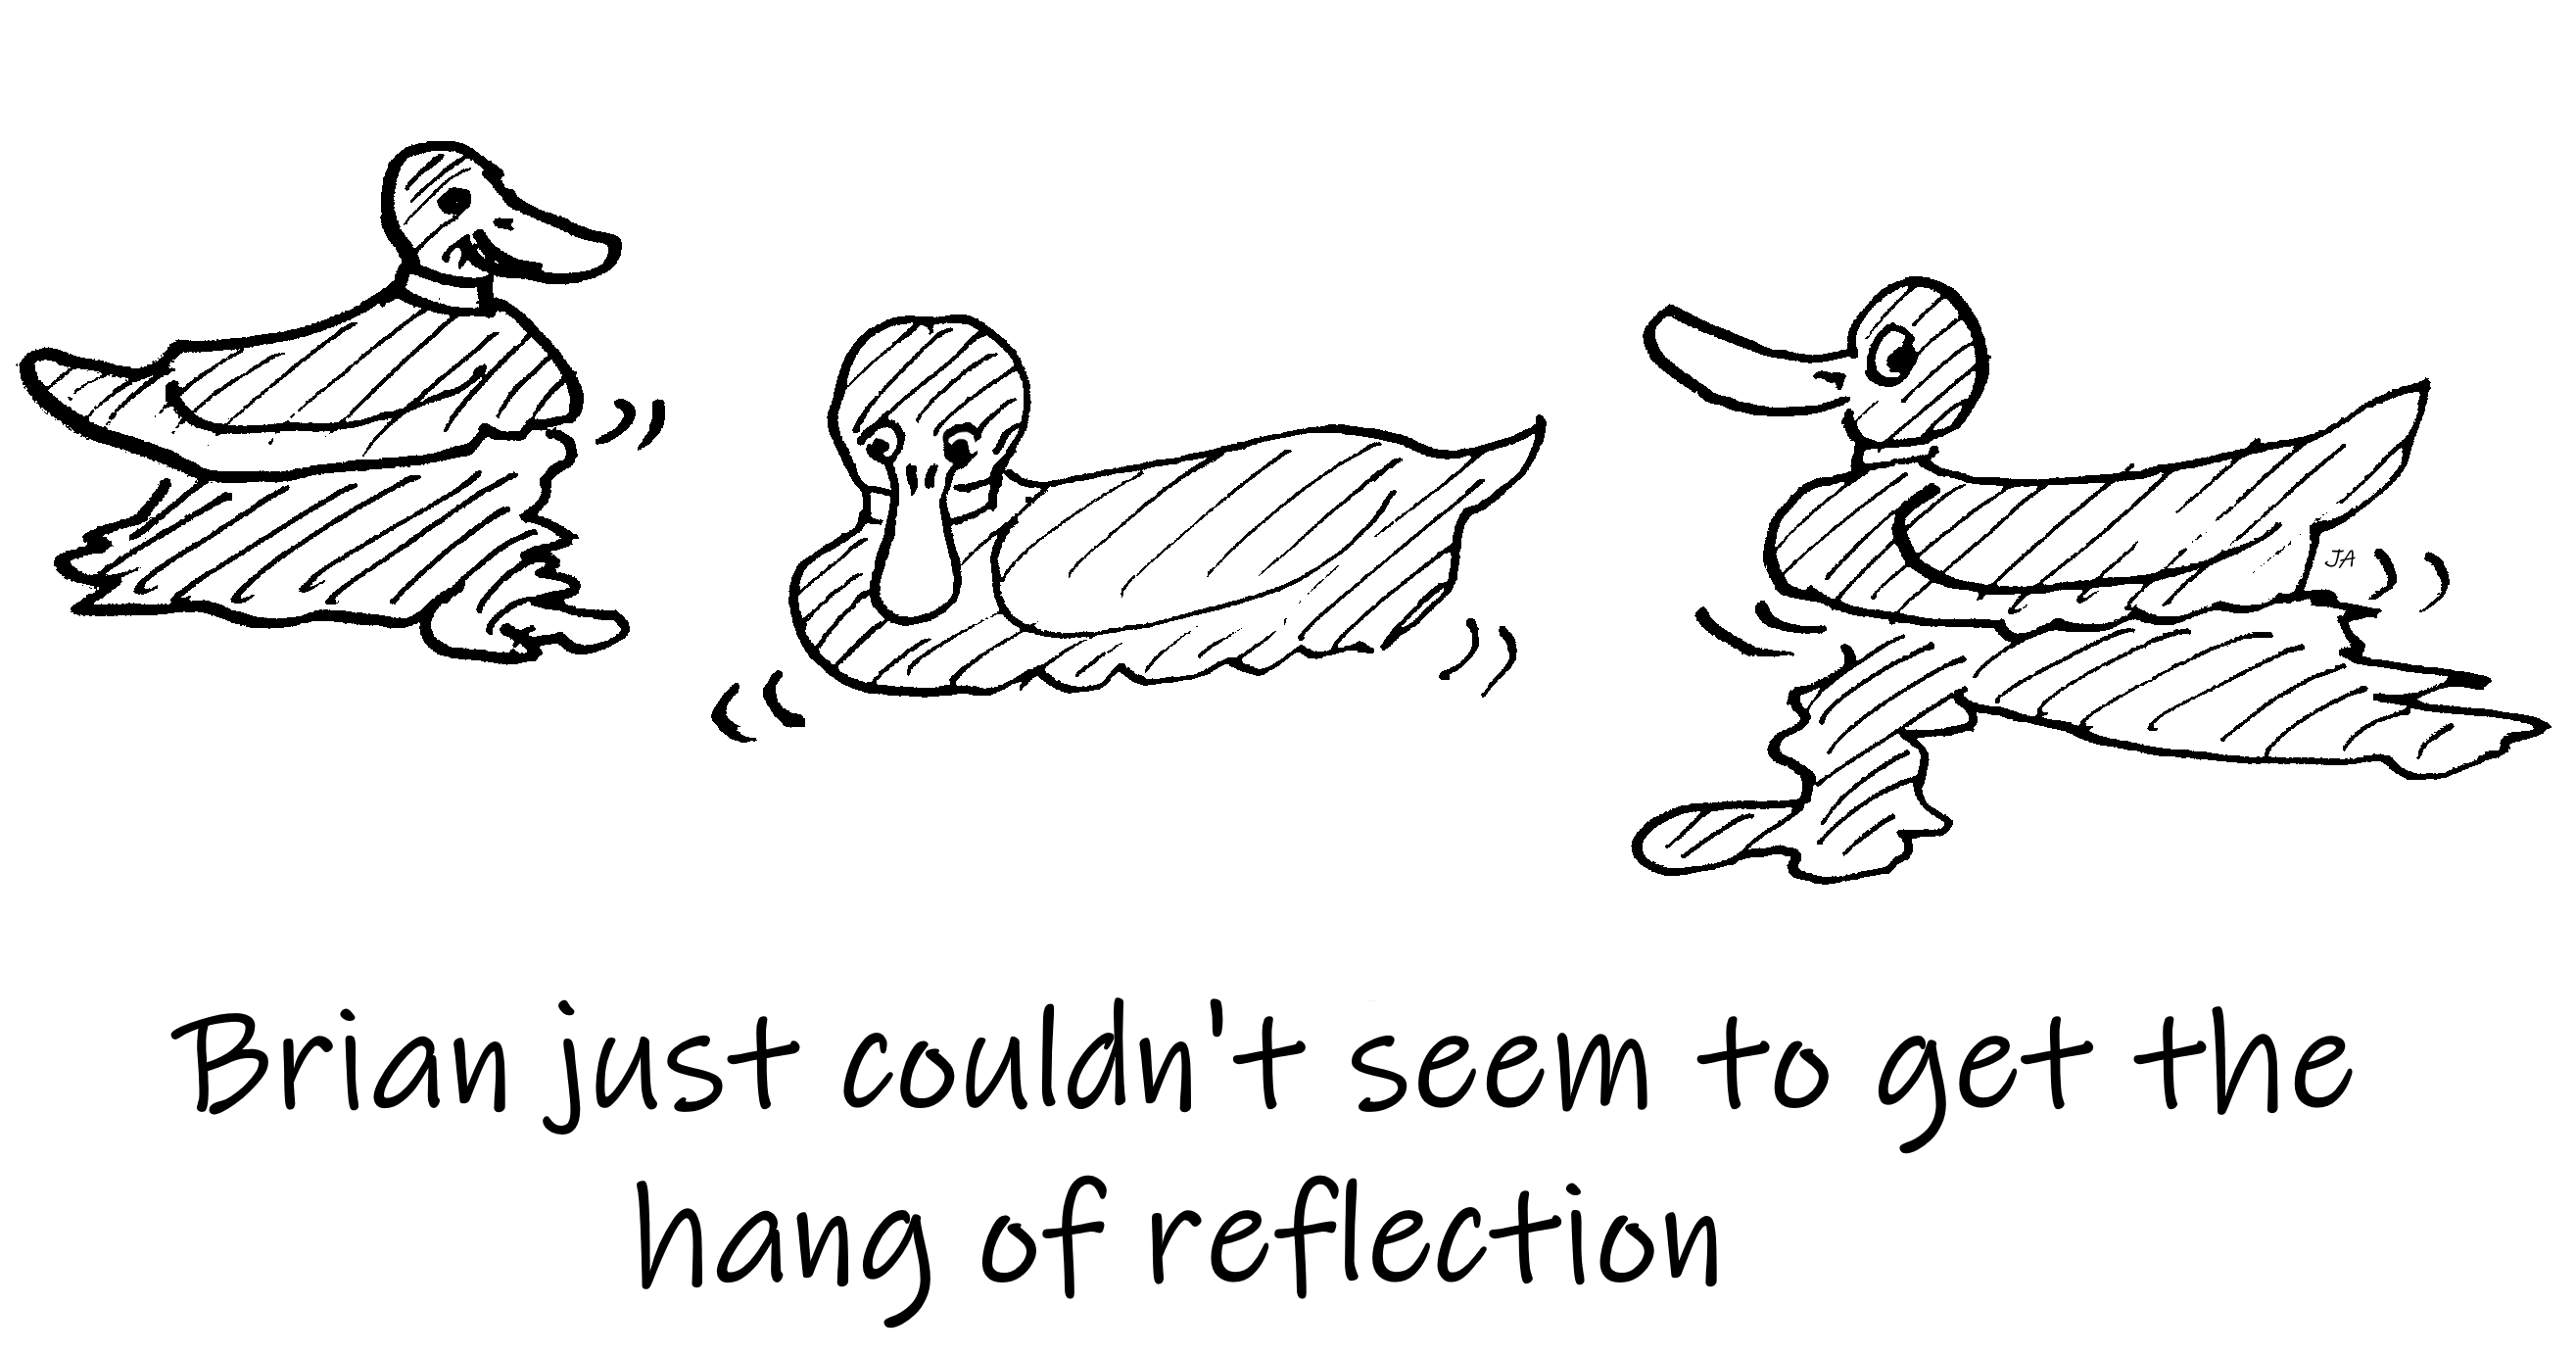 brian_just_couldn't_seem_to_get_the_hang_of_reflection_duck_jason_anderson